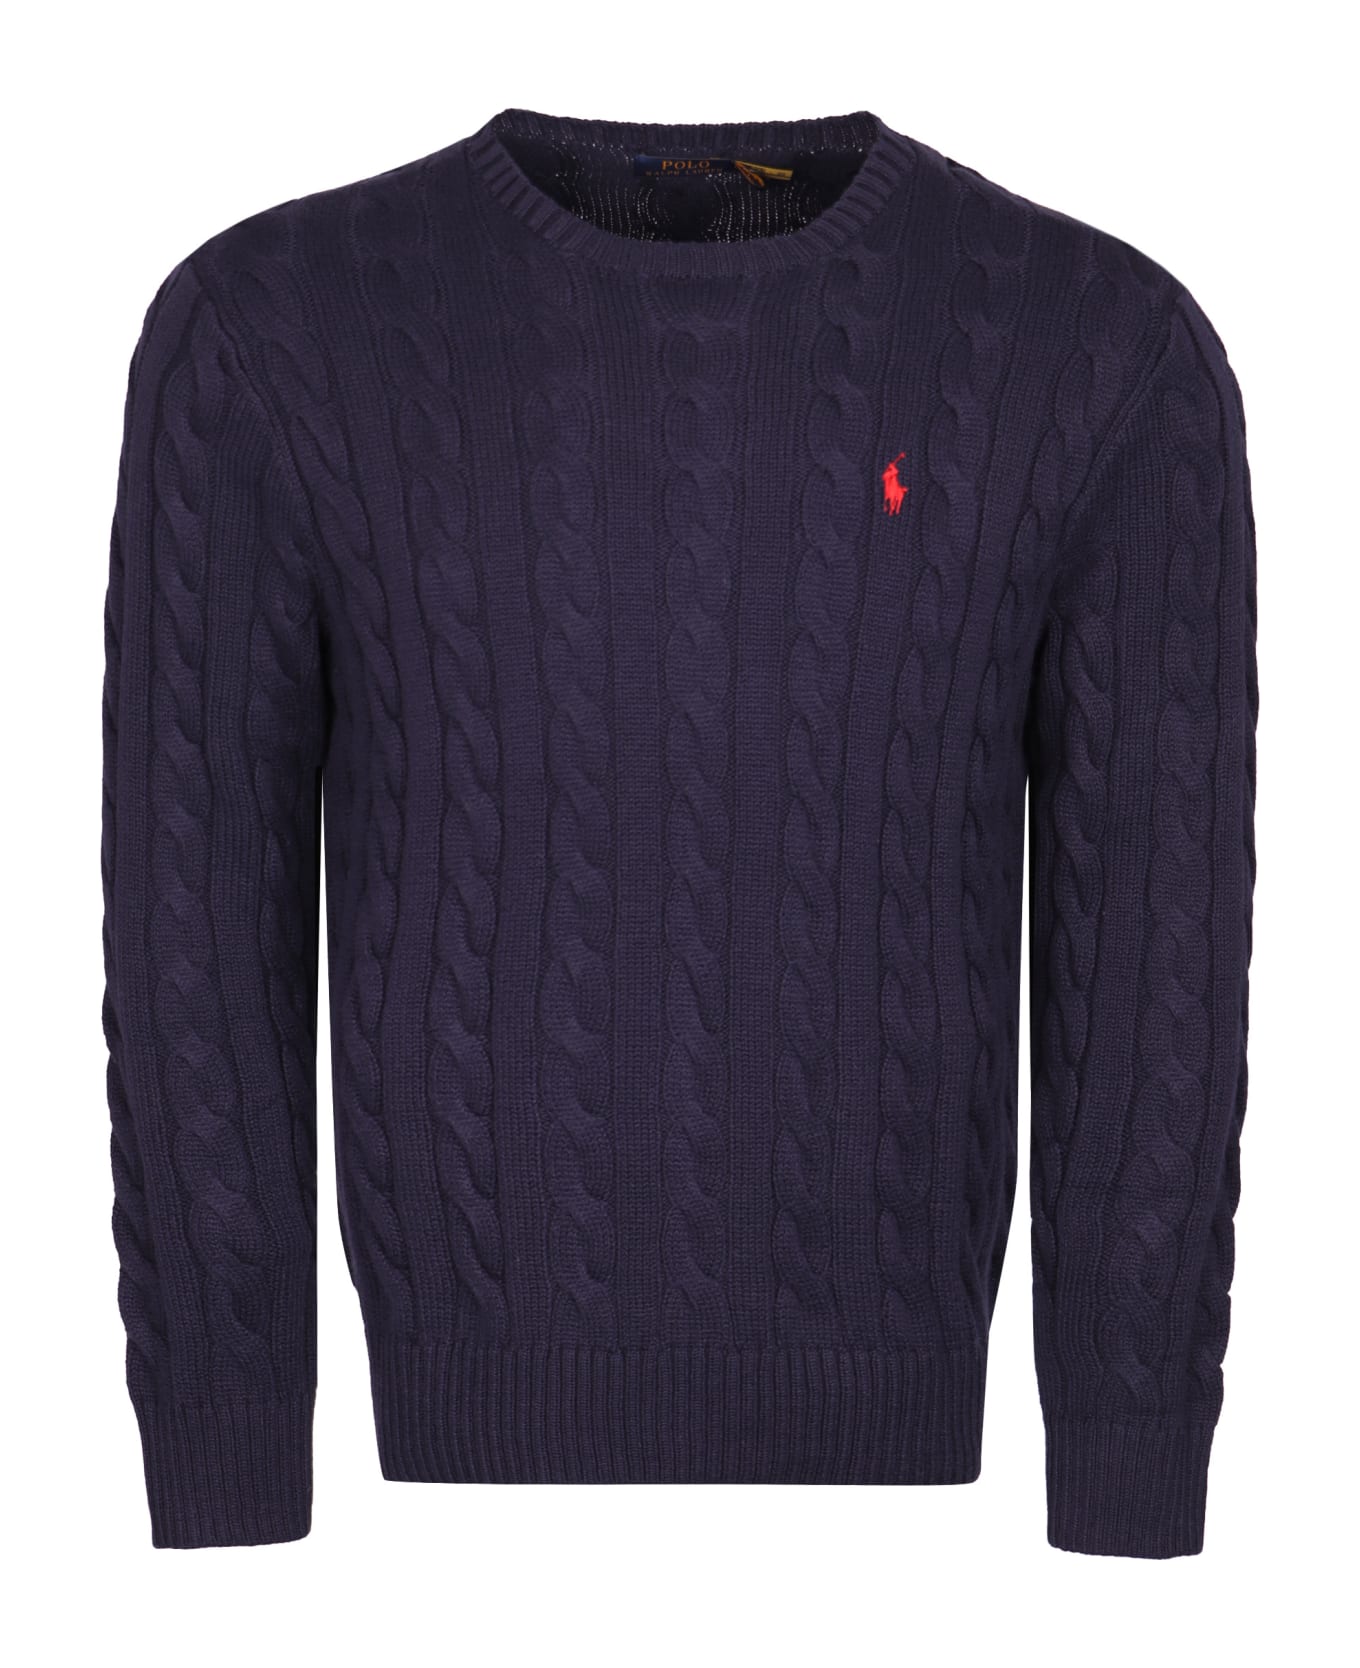 Polo Ralph Lauren Cable Knit Pullover - Hunter Navy